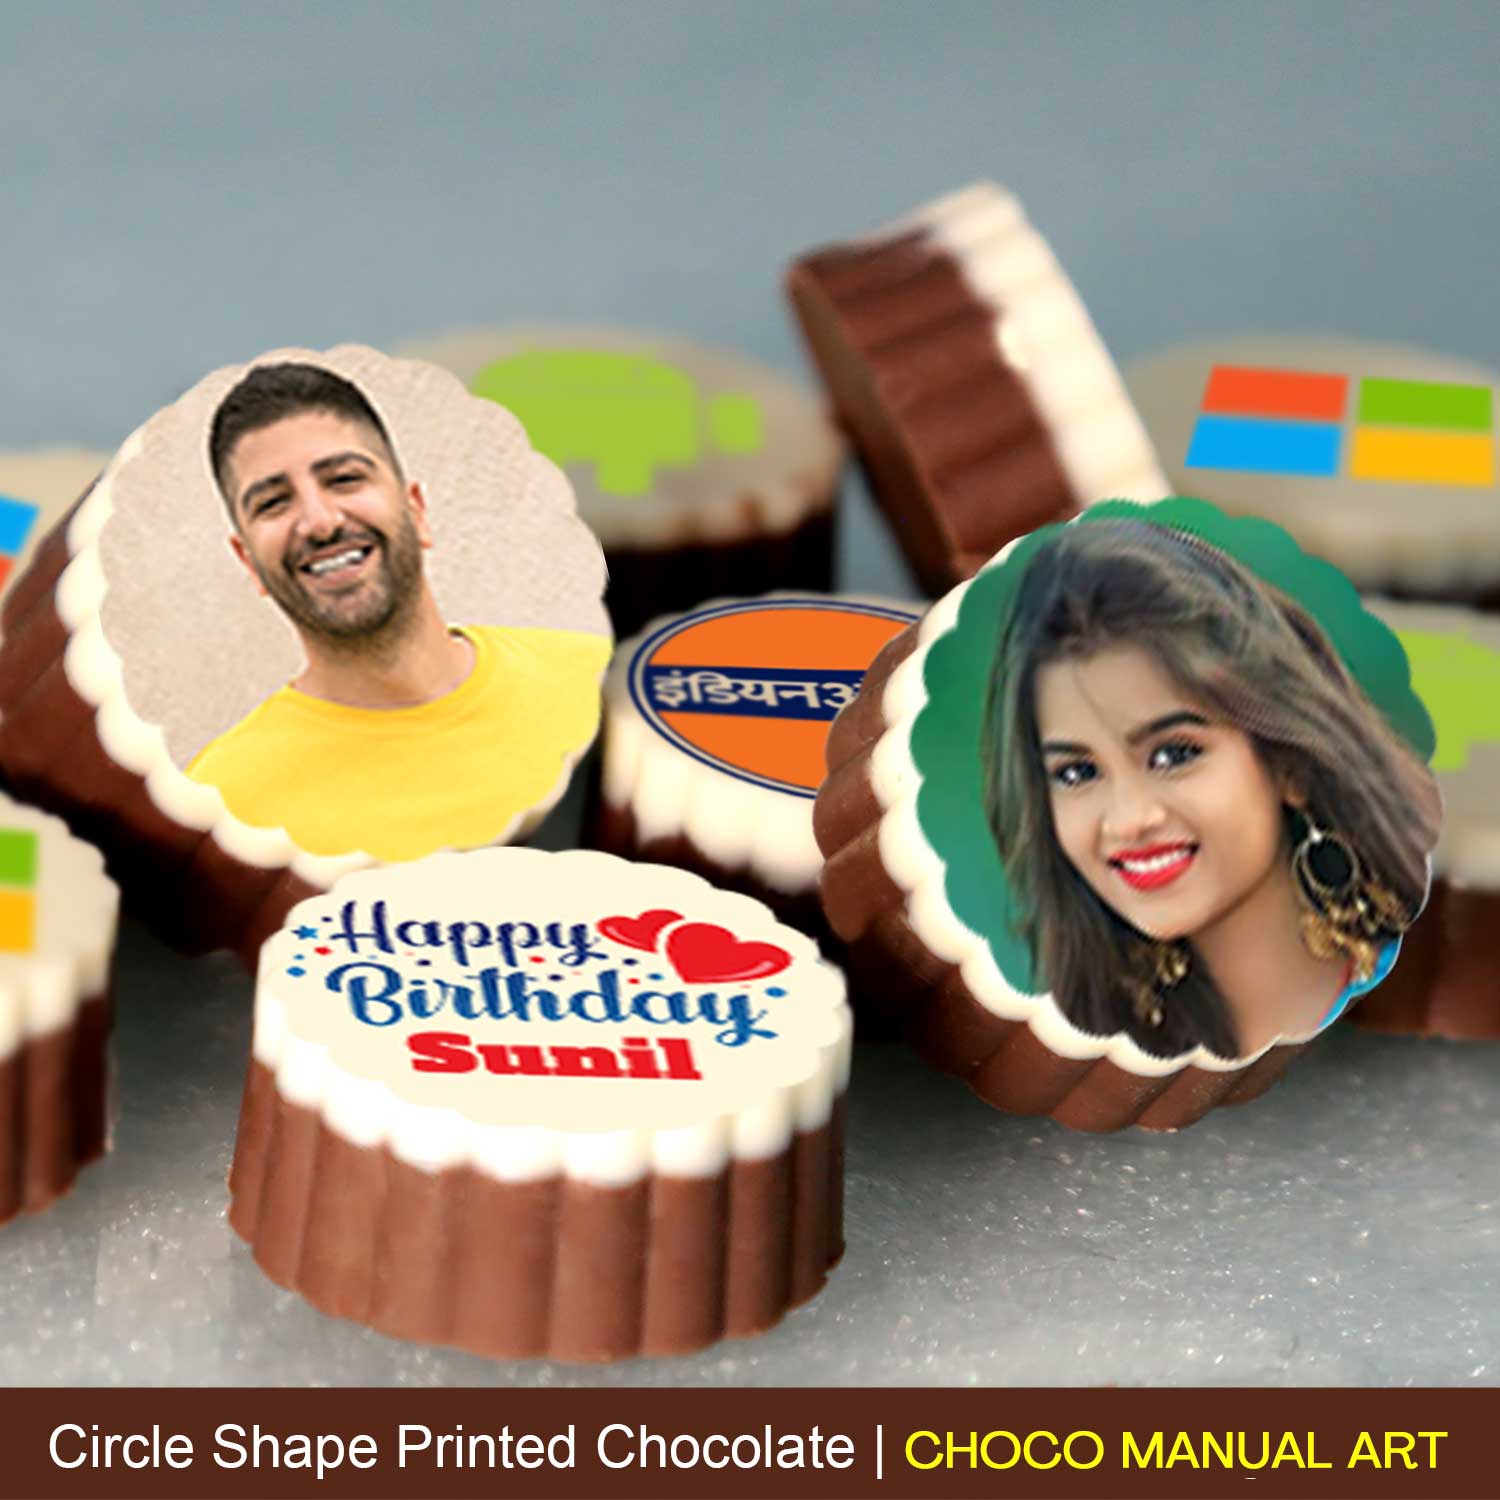 Personalized Chocolates with Printed Name